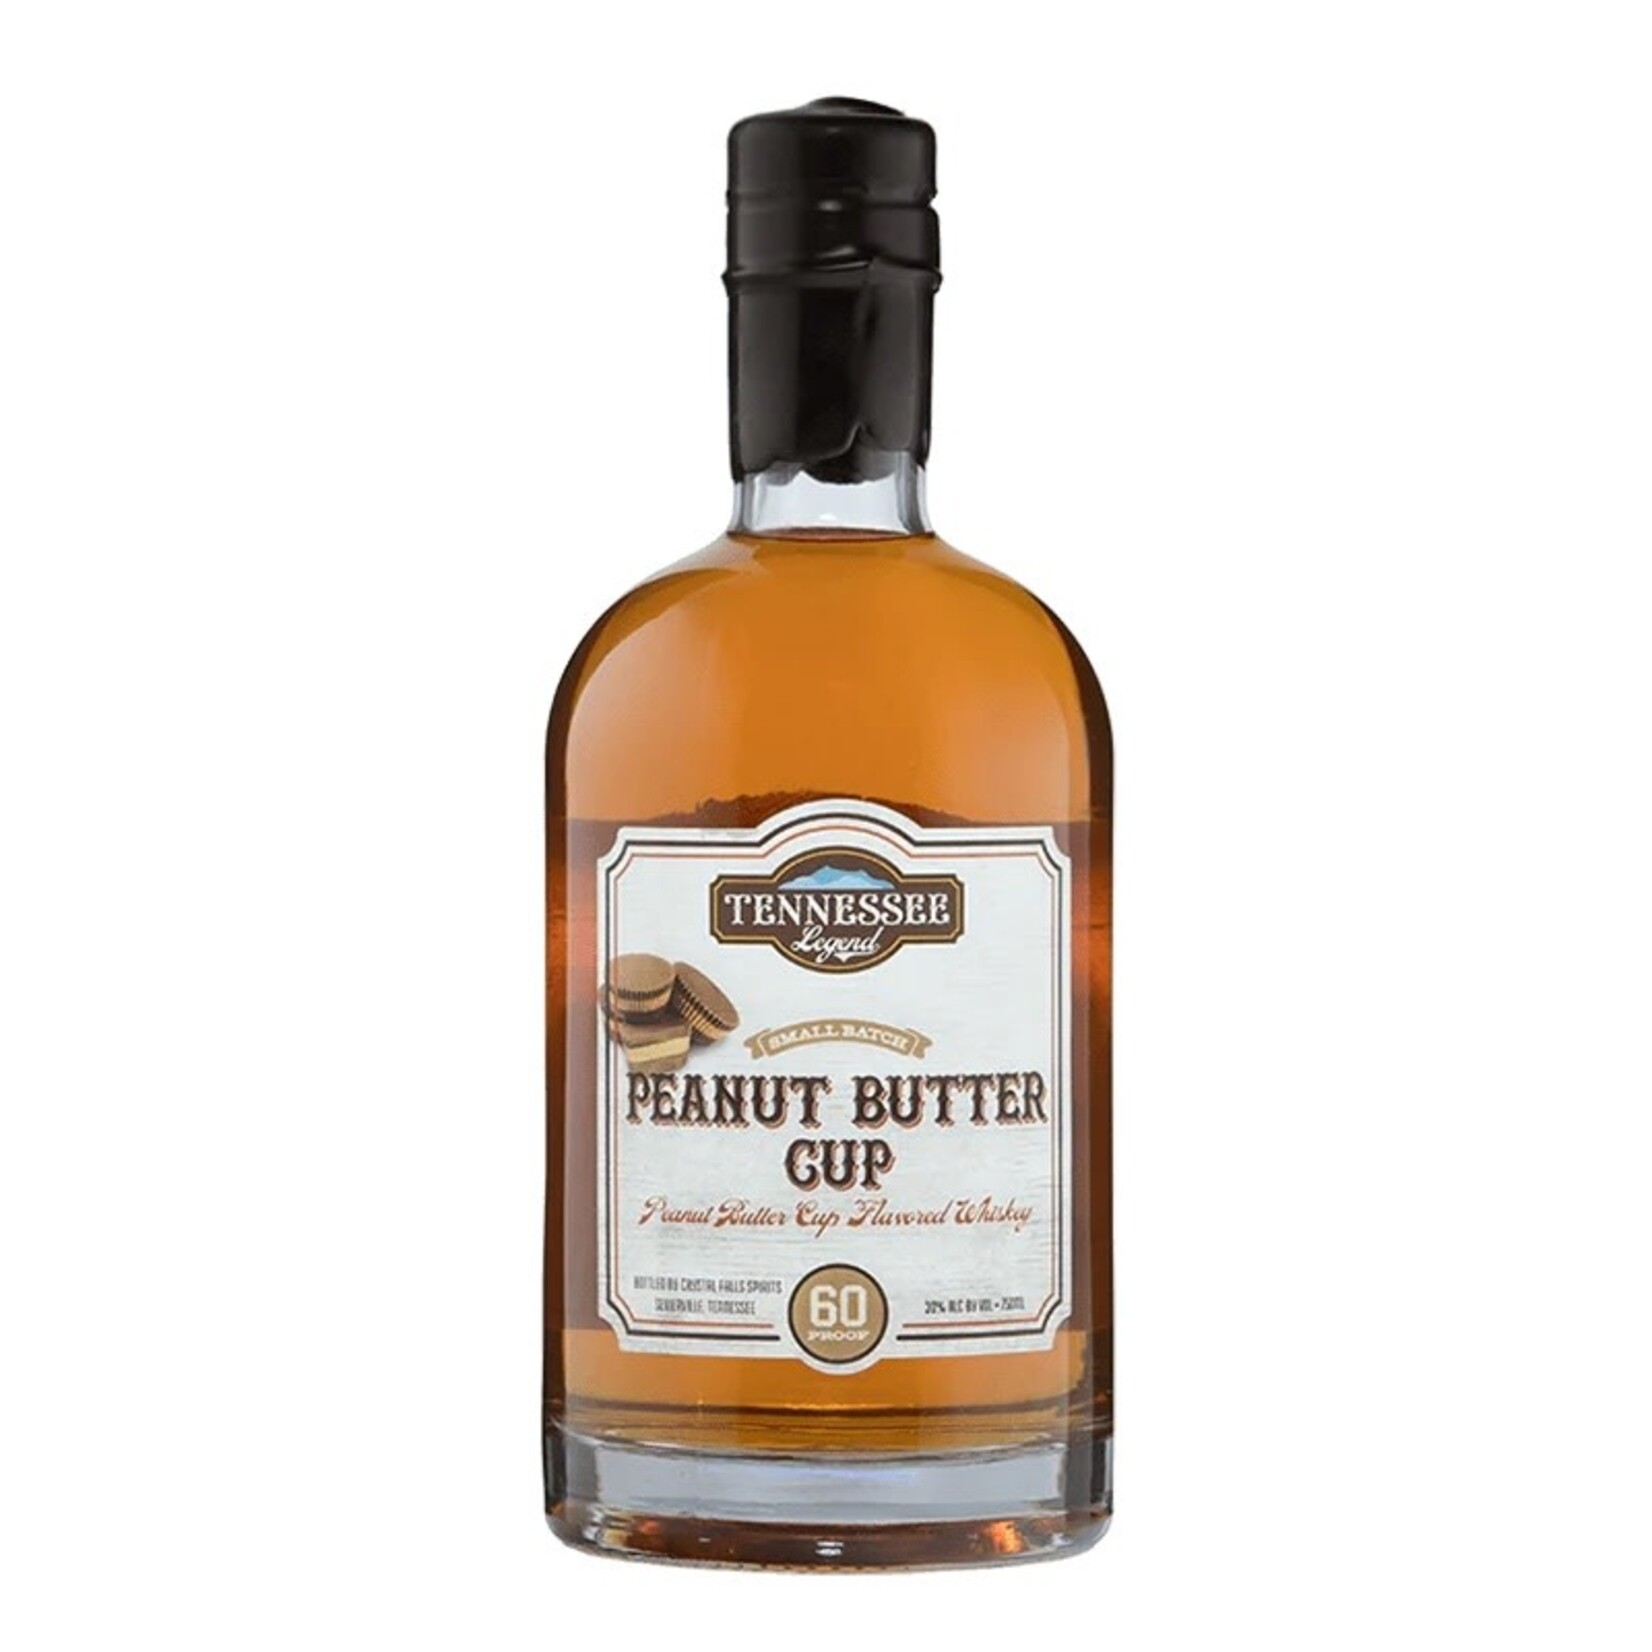 Tennessee Legend Peanut Butter Cup Whiskey 750 mL